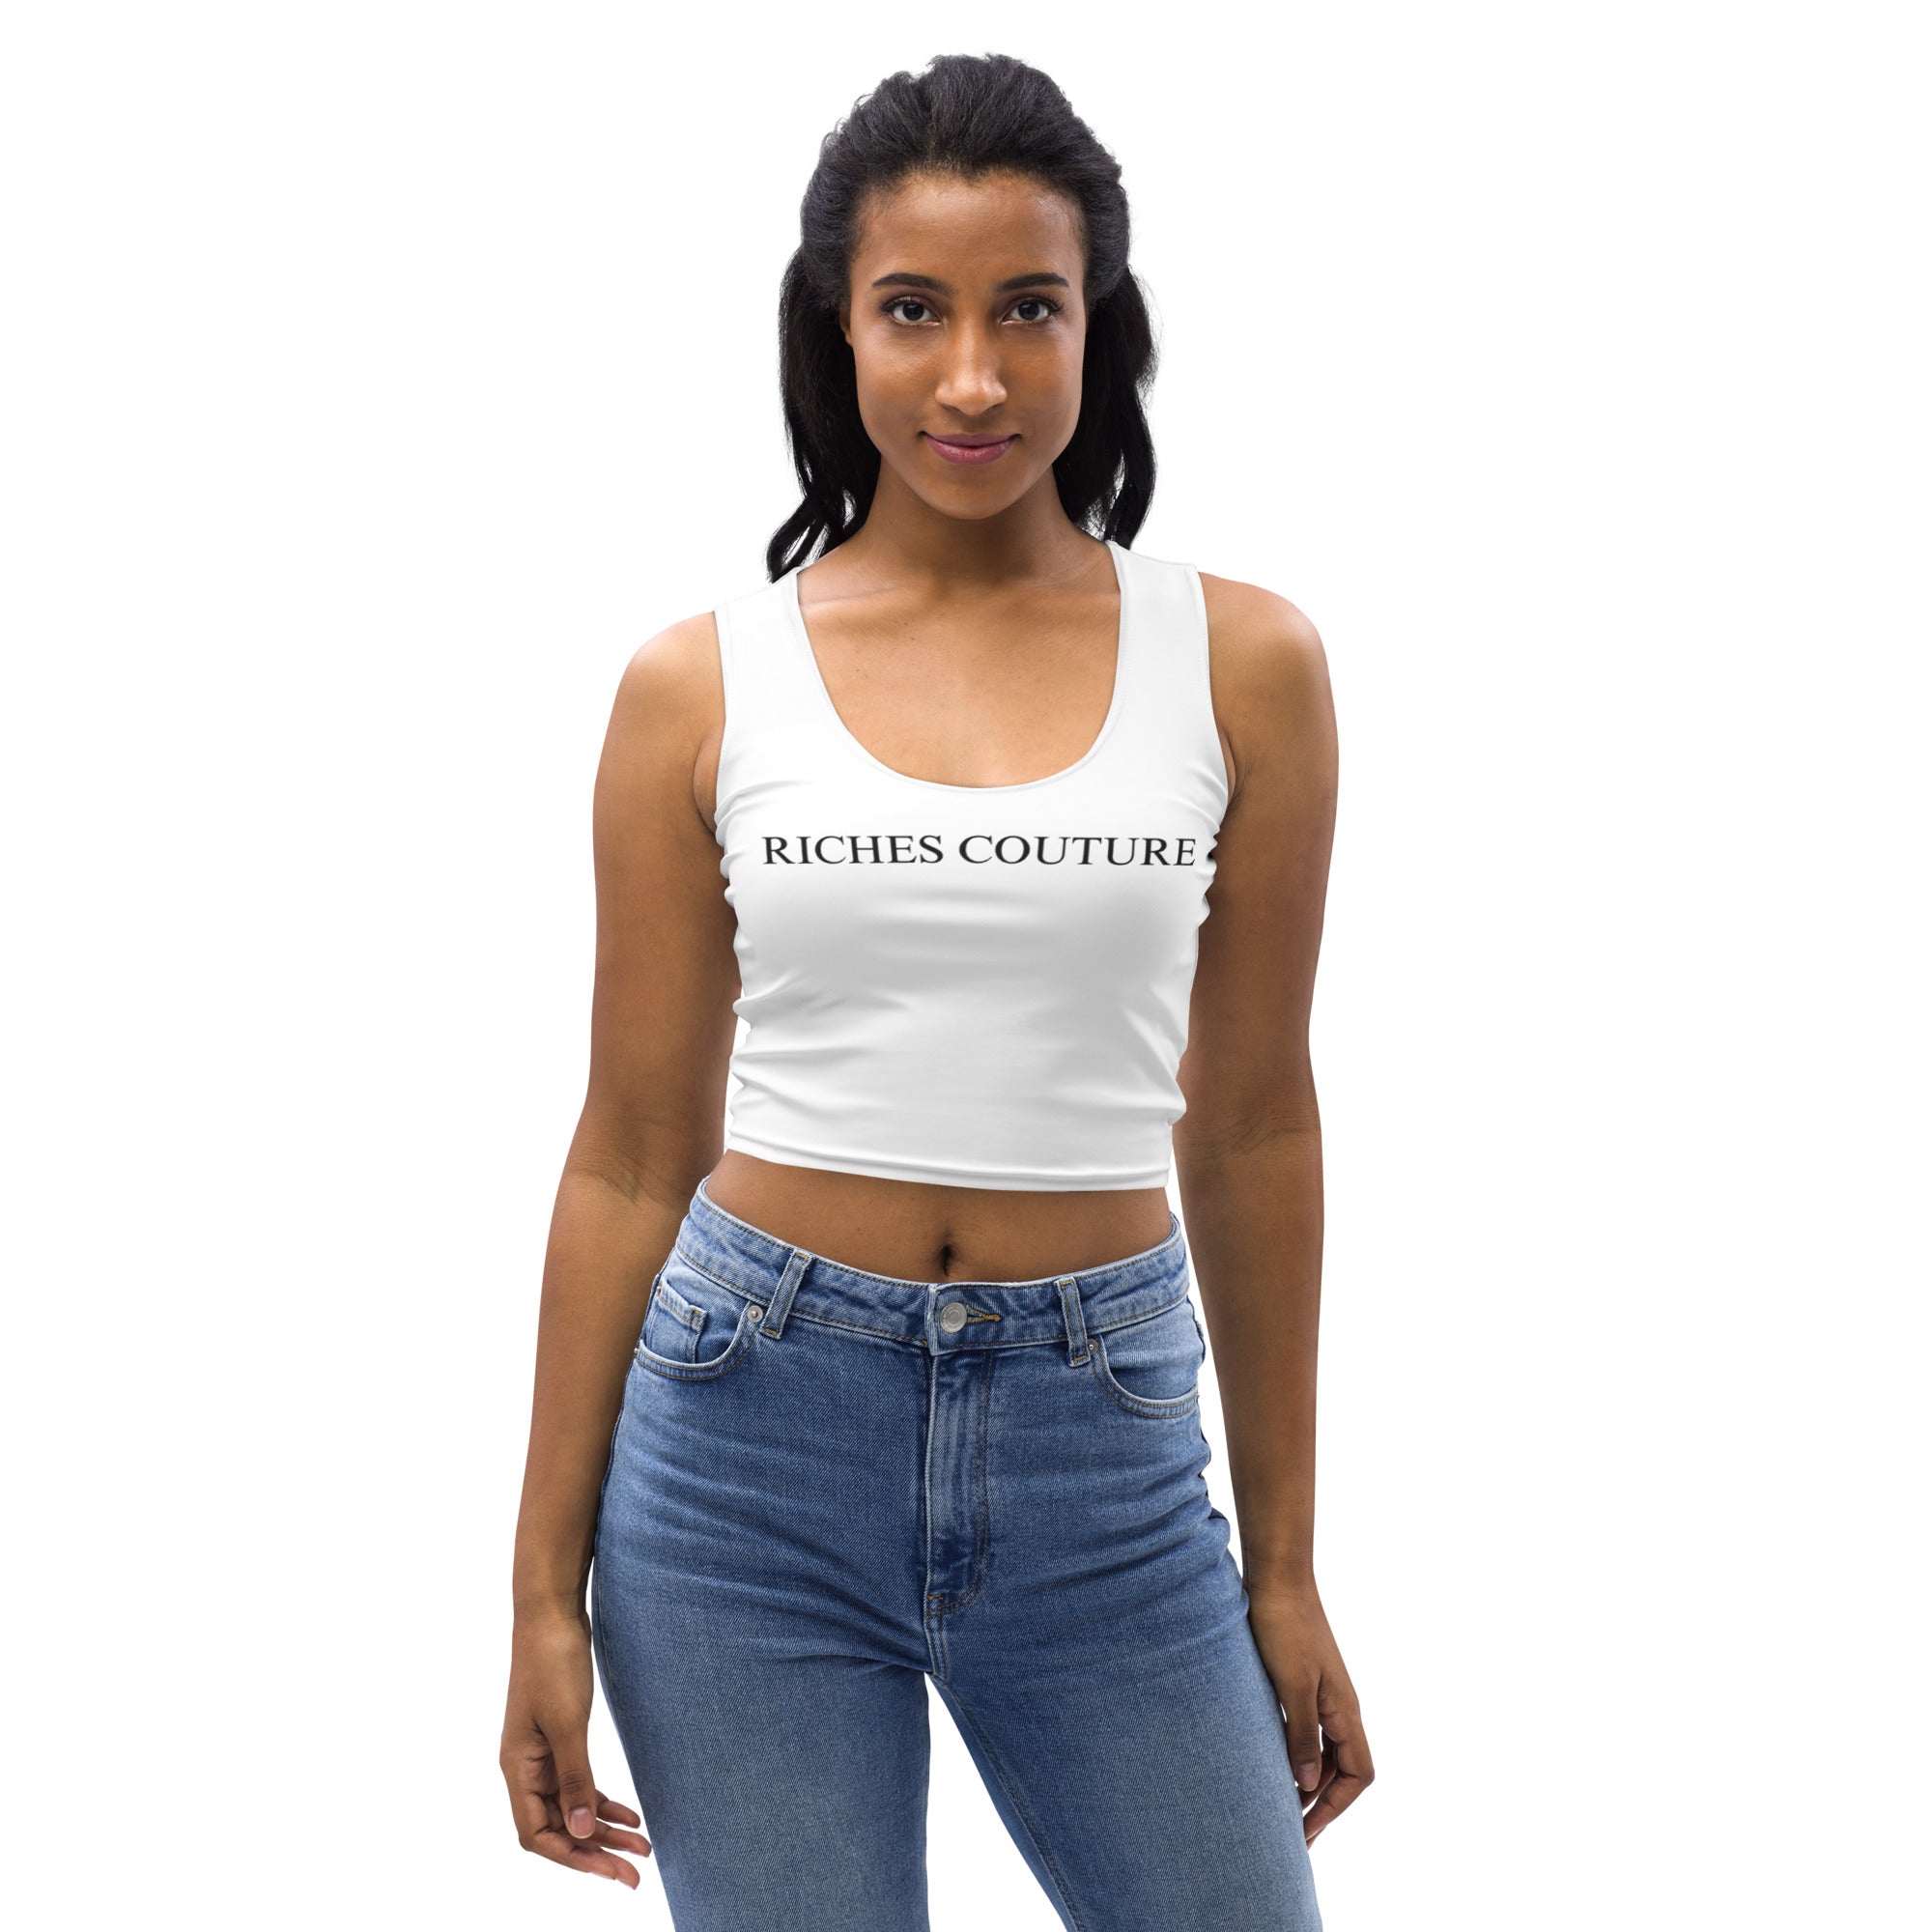 Riches Couture Femme Women Crop Top white